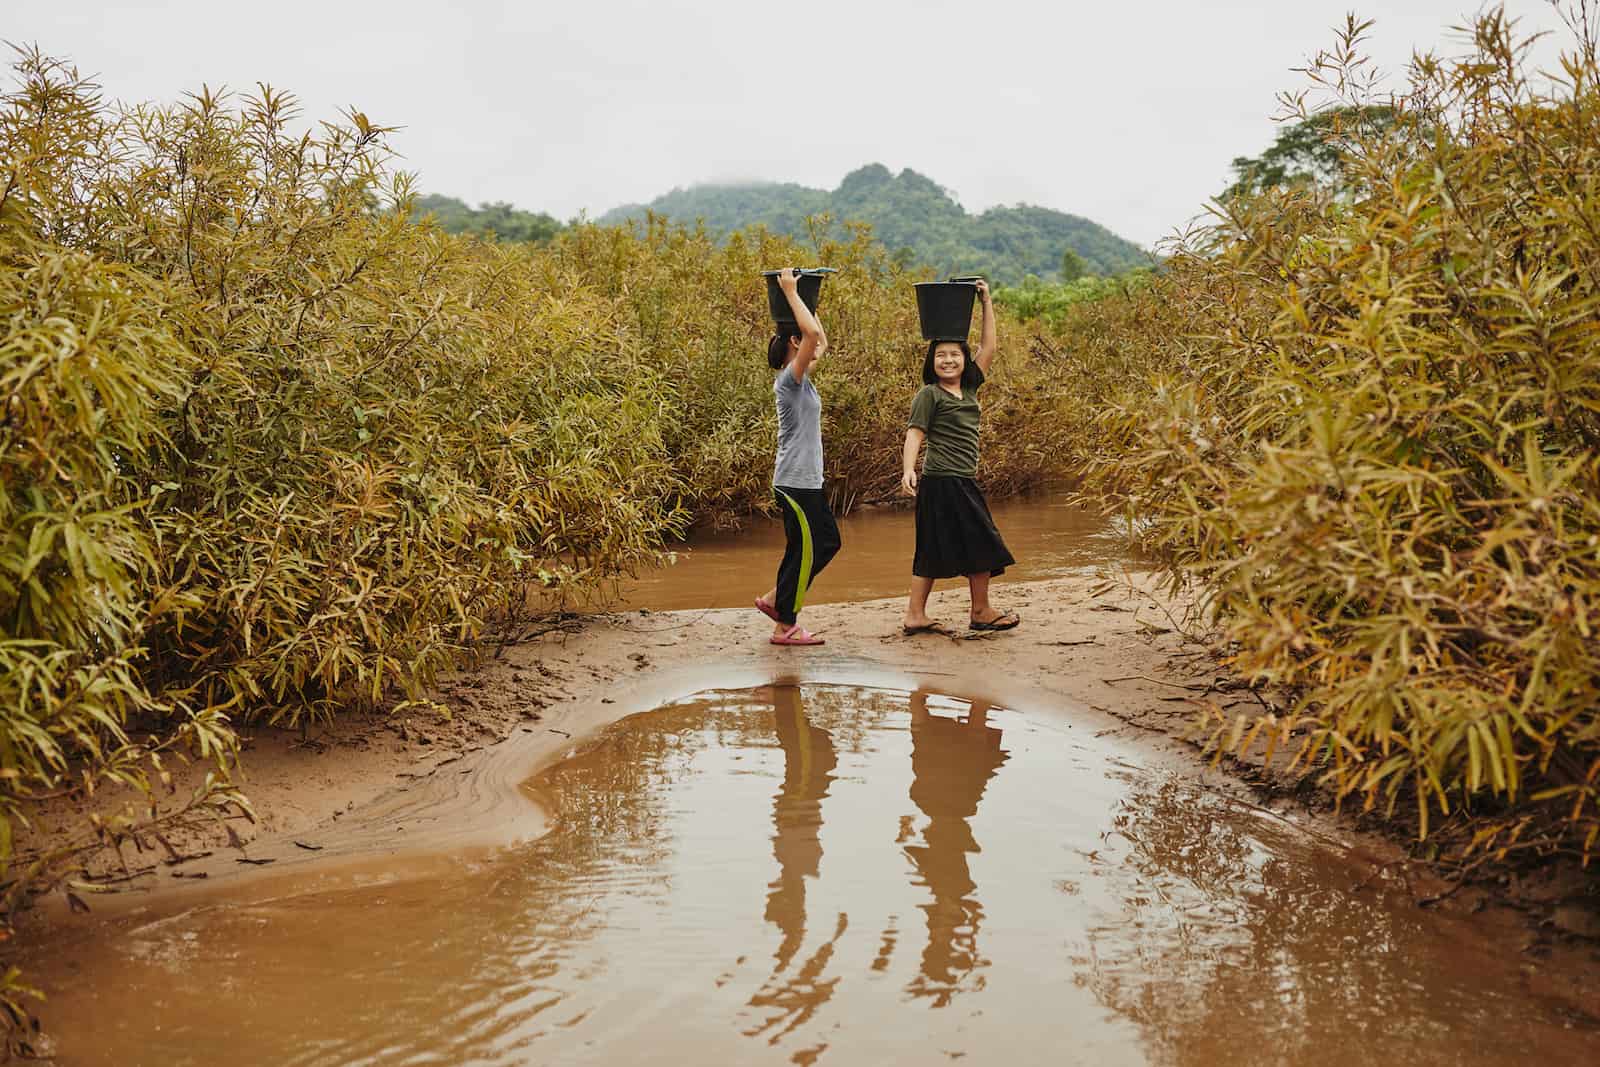 Two girls carry black buckets on their heads, standing in front of a small river, with foliage in the background.